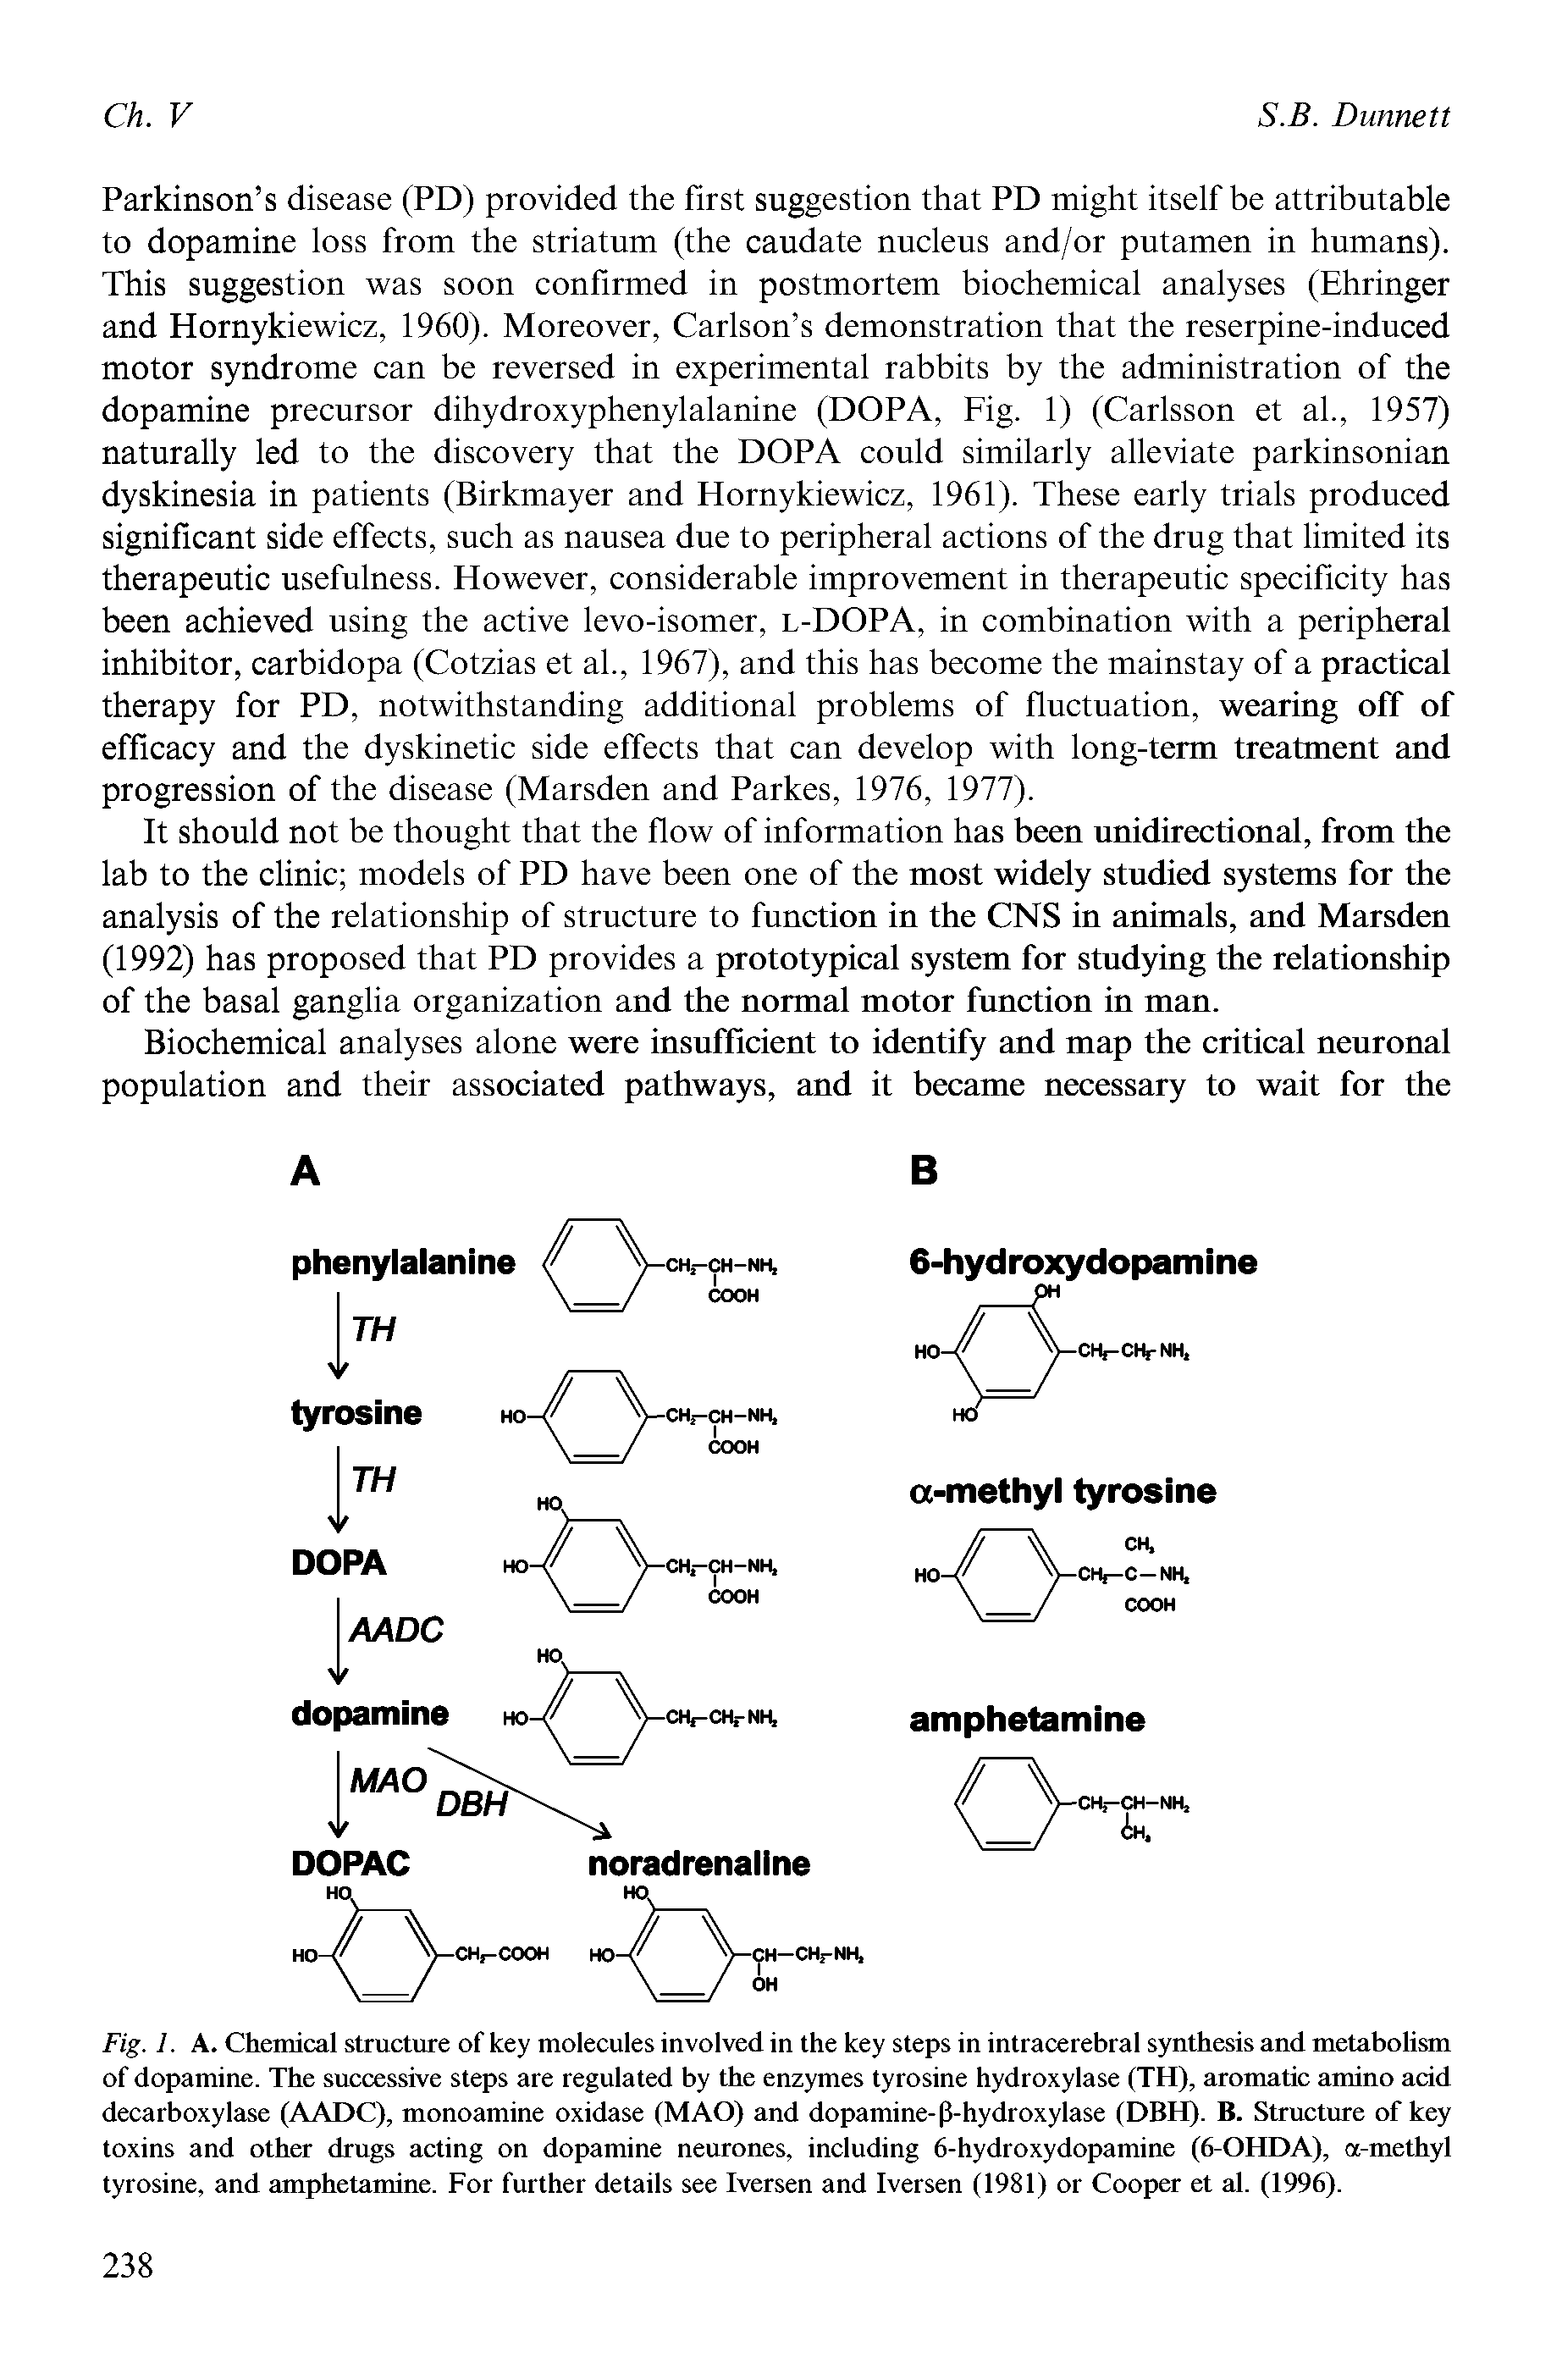 Fig. 1. A. Chemical structure of key molecules involved in the key steps in intracerebral synthesis and metabolism of dopamine. The successive steps are regulated by the enzymes tyrosine hydroxylase (TH), aromatic amino acid decarboxylase (AADC), monoamine oxidase (MAO) and dopamine-p-hydroxylase (DBH). B. Structure of key toxins and other drugs acting on dopamine neurones, including 6-hydroxydopamine (6-OHDA), a-methyl tyrosine, and amphetamine. For further details see Iversen and Iversen (1981) or Cooper et al. (1996).